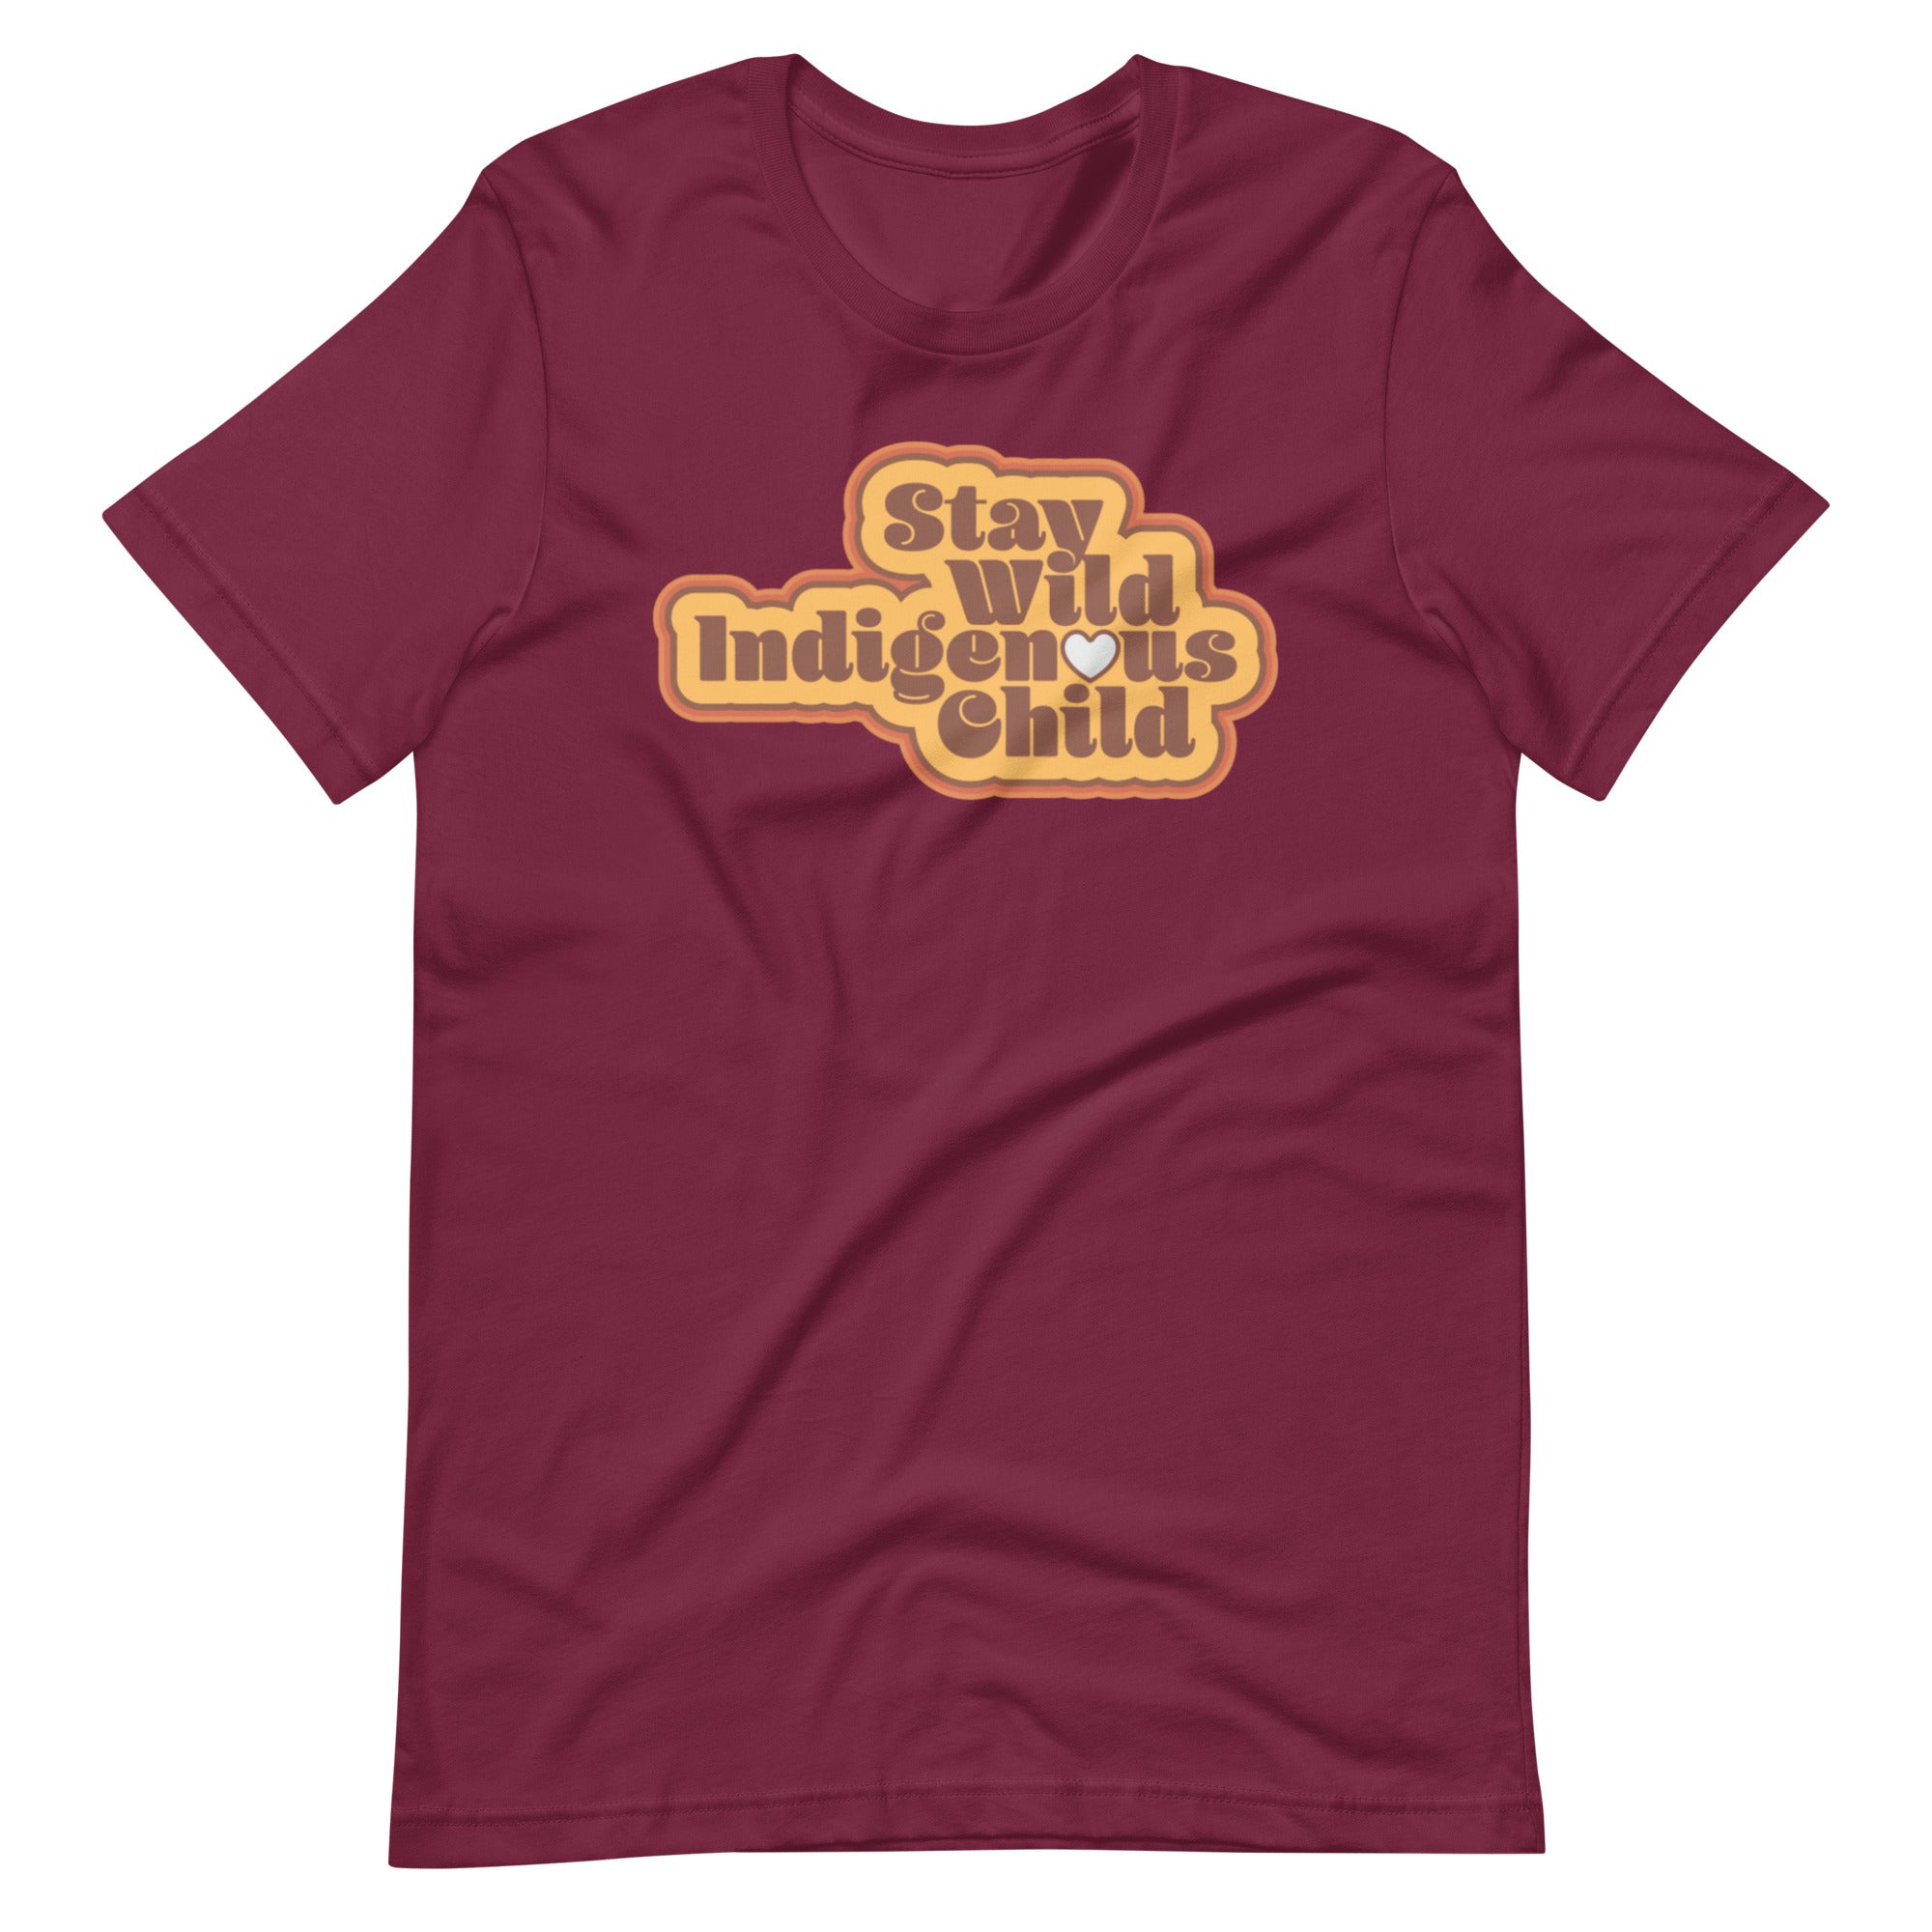 Stay Wild Indigenous Child t-shirt